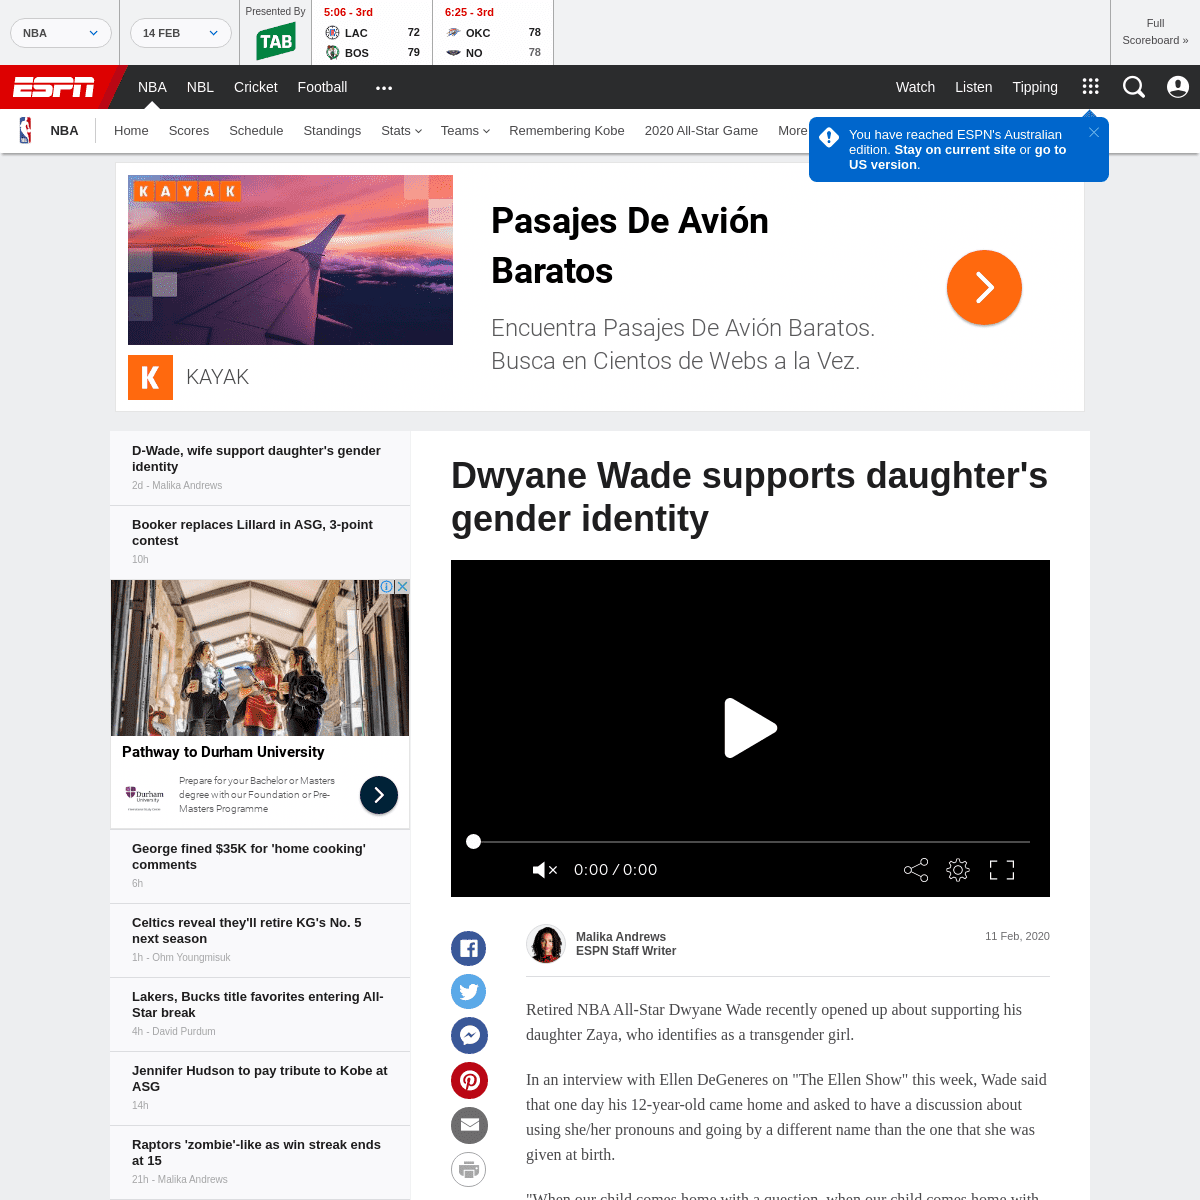 A complete backup of www.espn.com.au/nba/story/_/id/28681410/dwyane-wade-supports-daughter-gender-identity